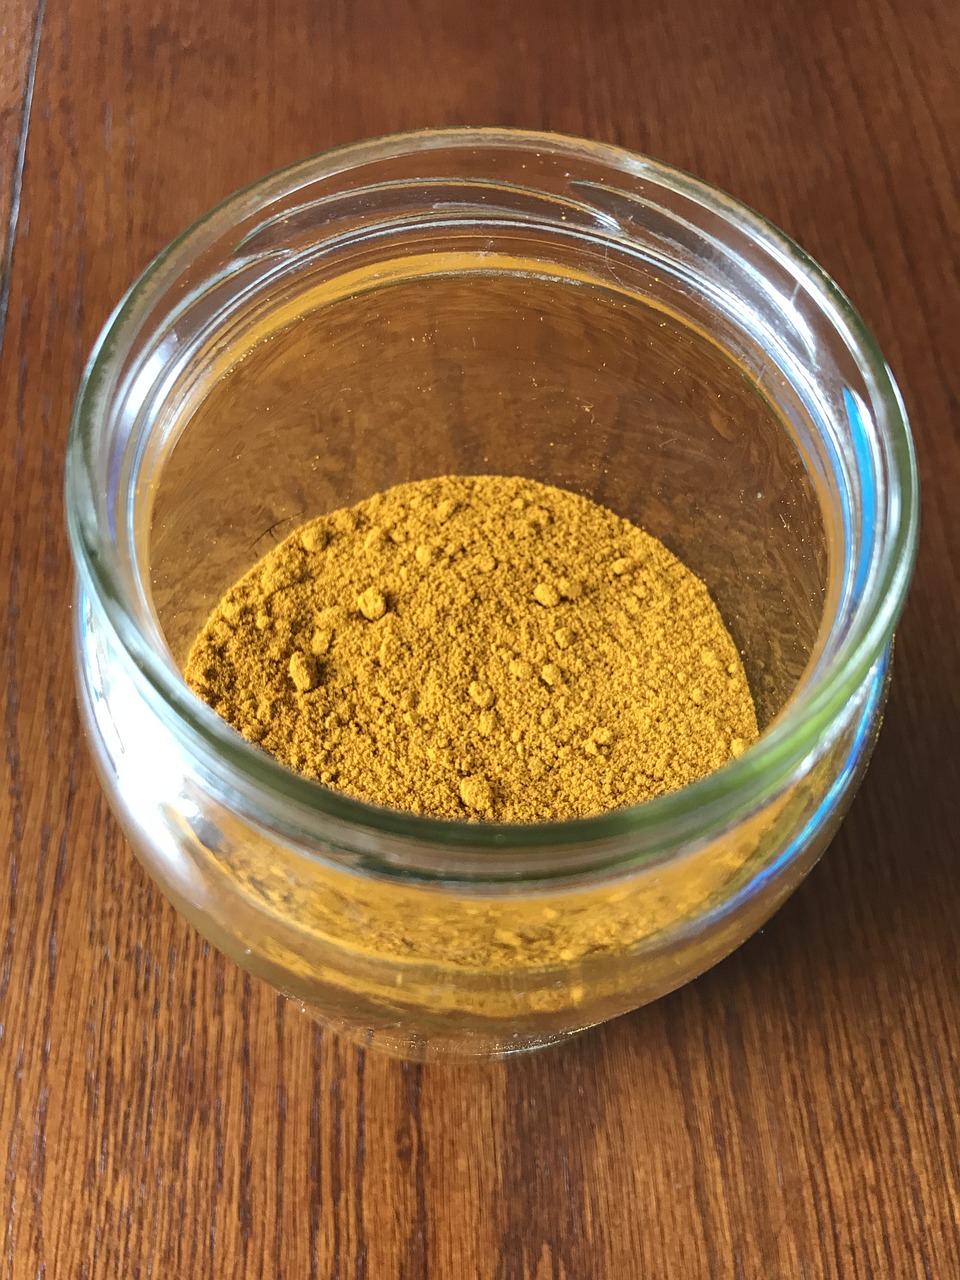 How to Make Curry Powder